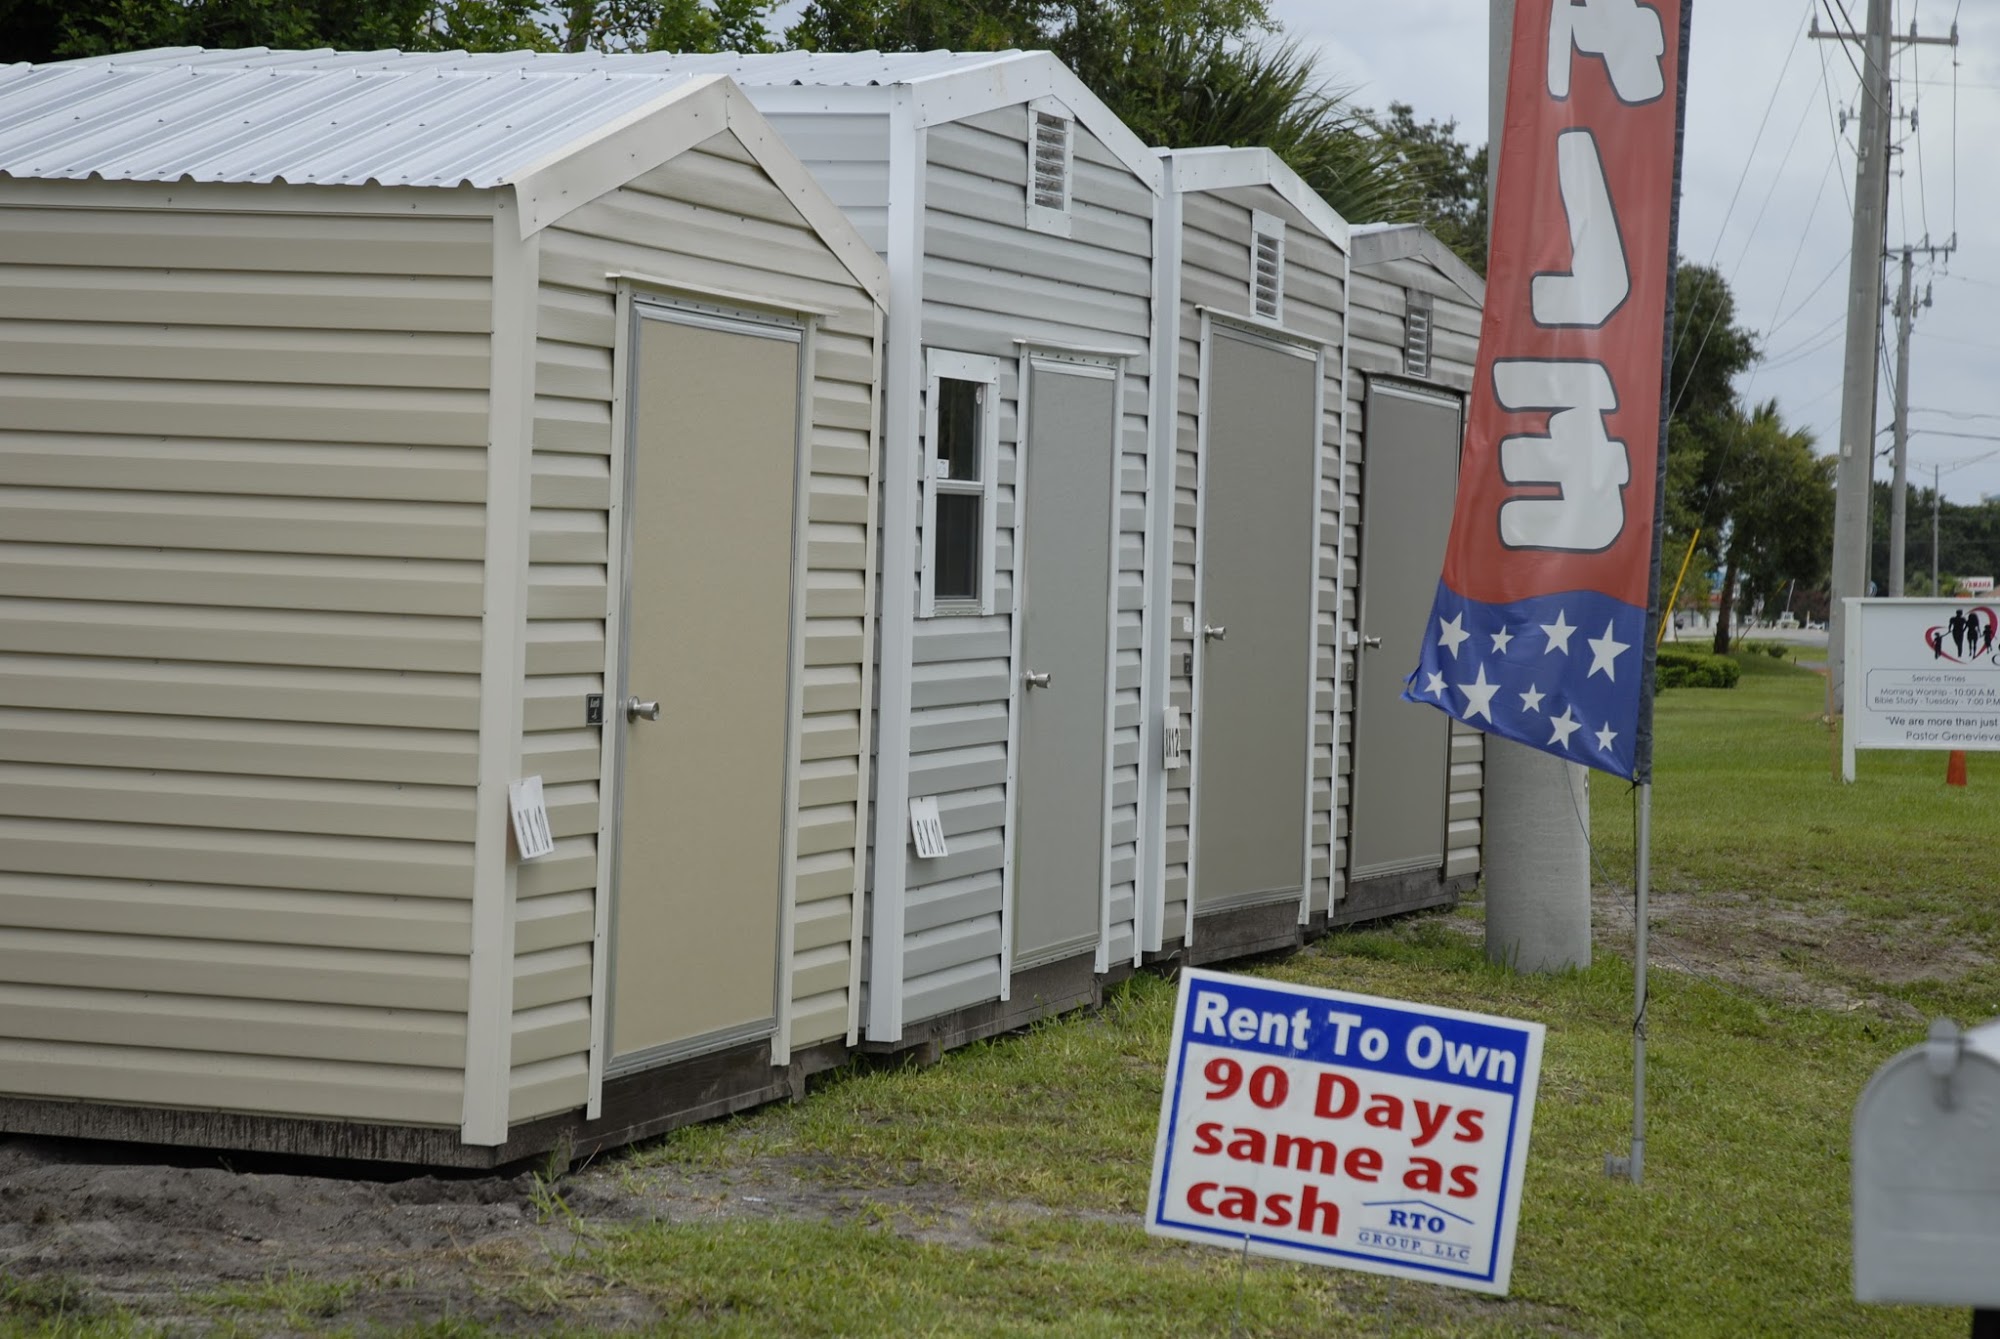 The King of Sheds - The Shed Pro's. New & Used Sheds & Shed Moving